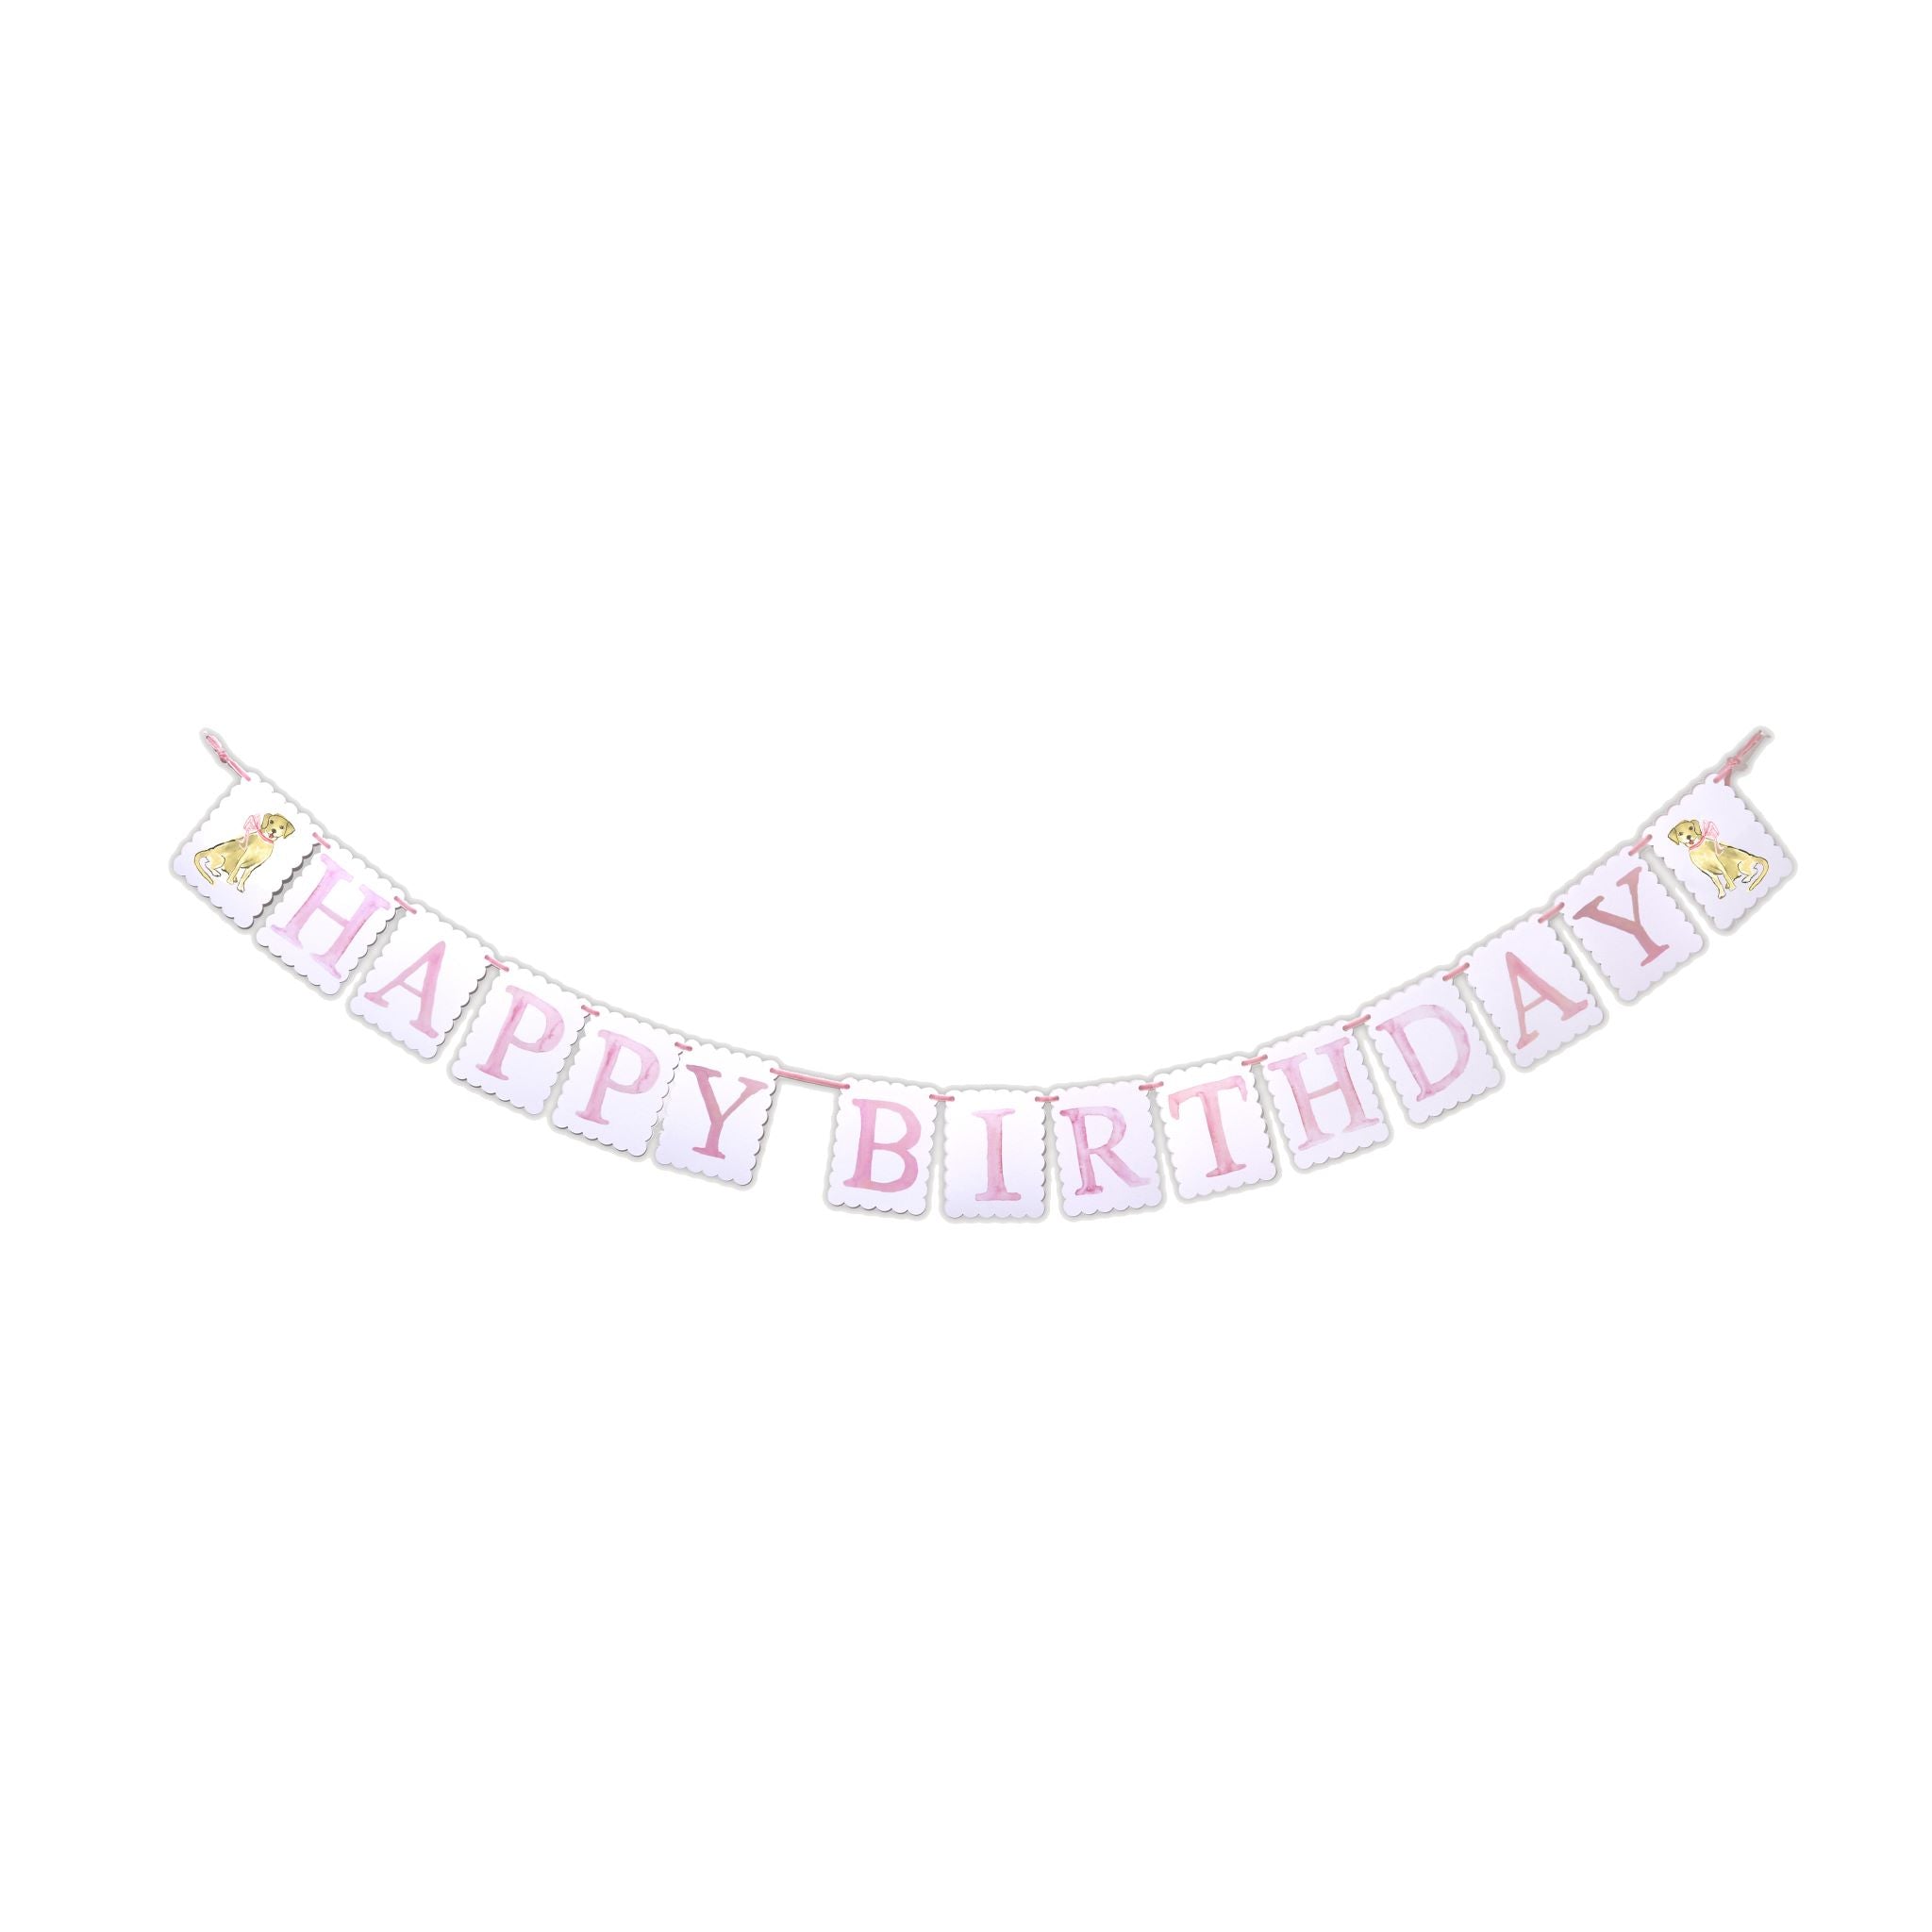 "Happy Birthday" Banner - Yellow Puppy with Pink Bow